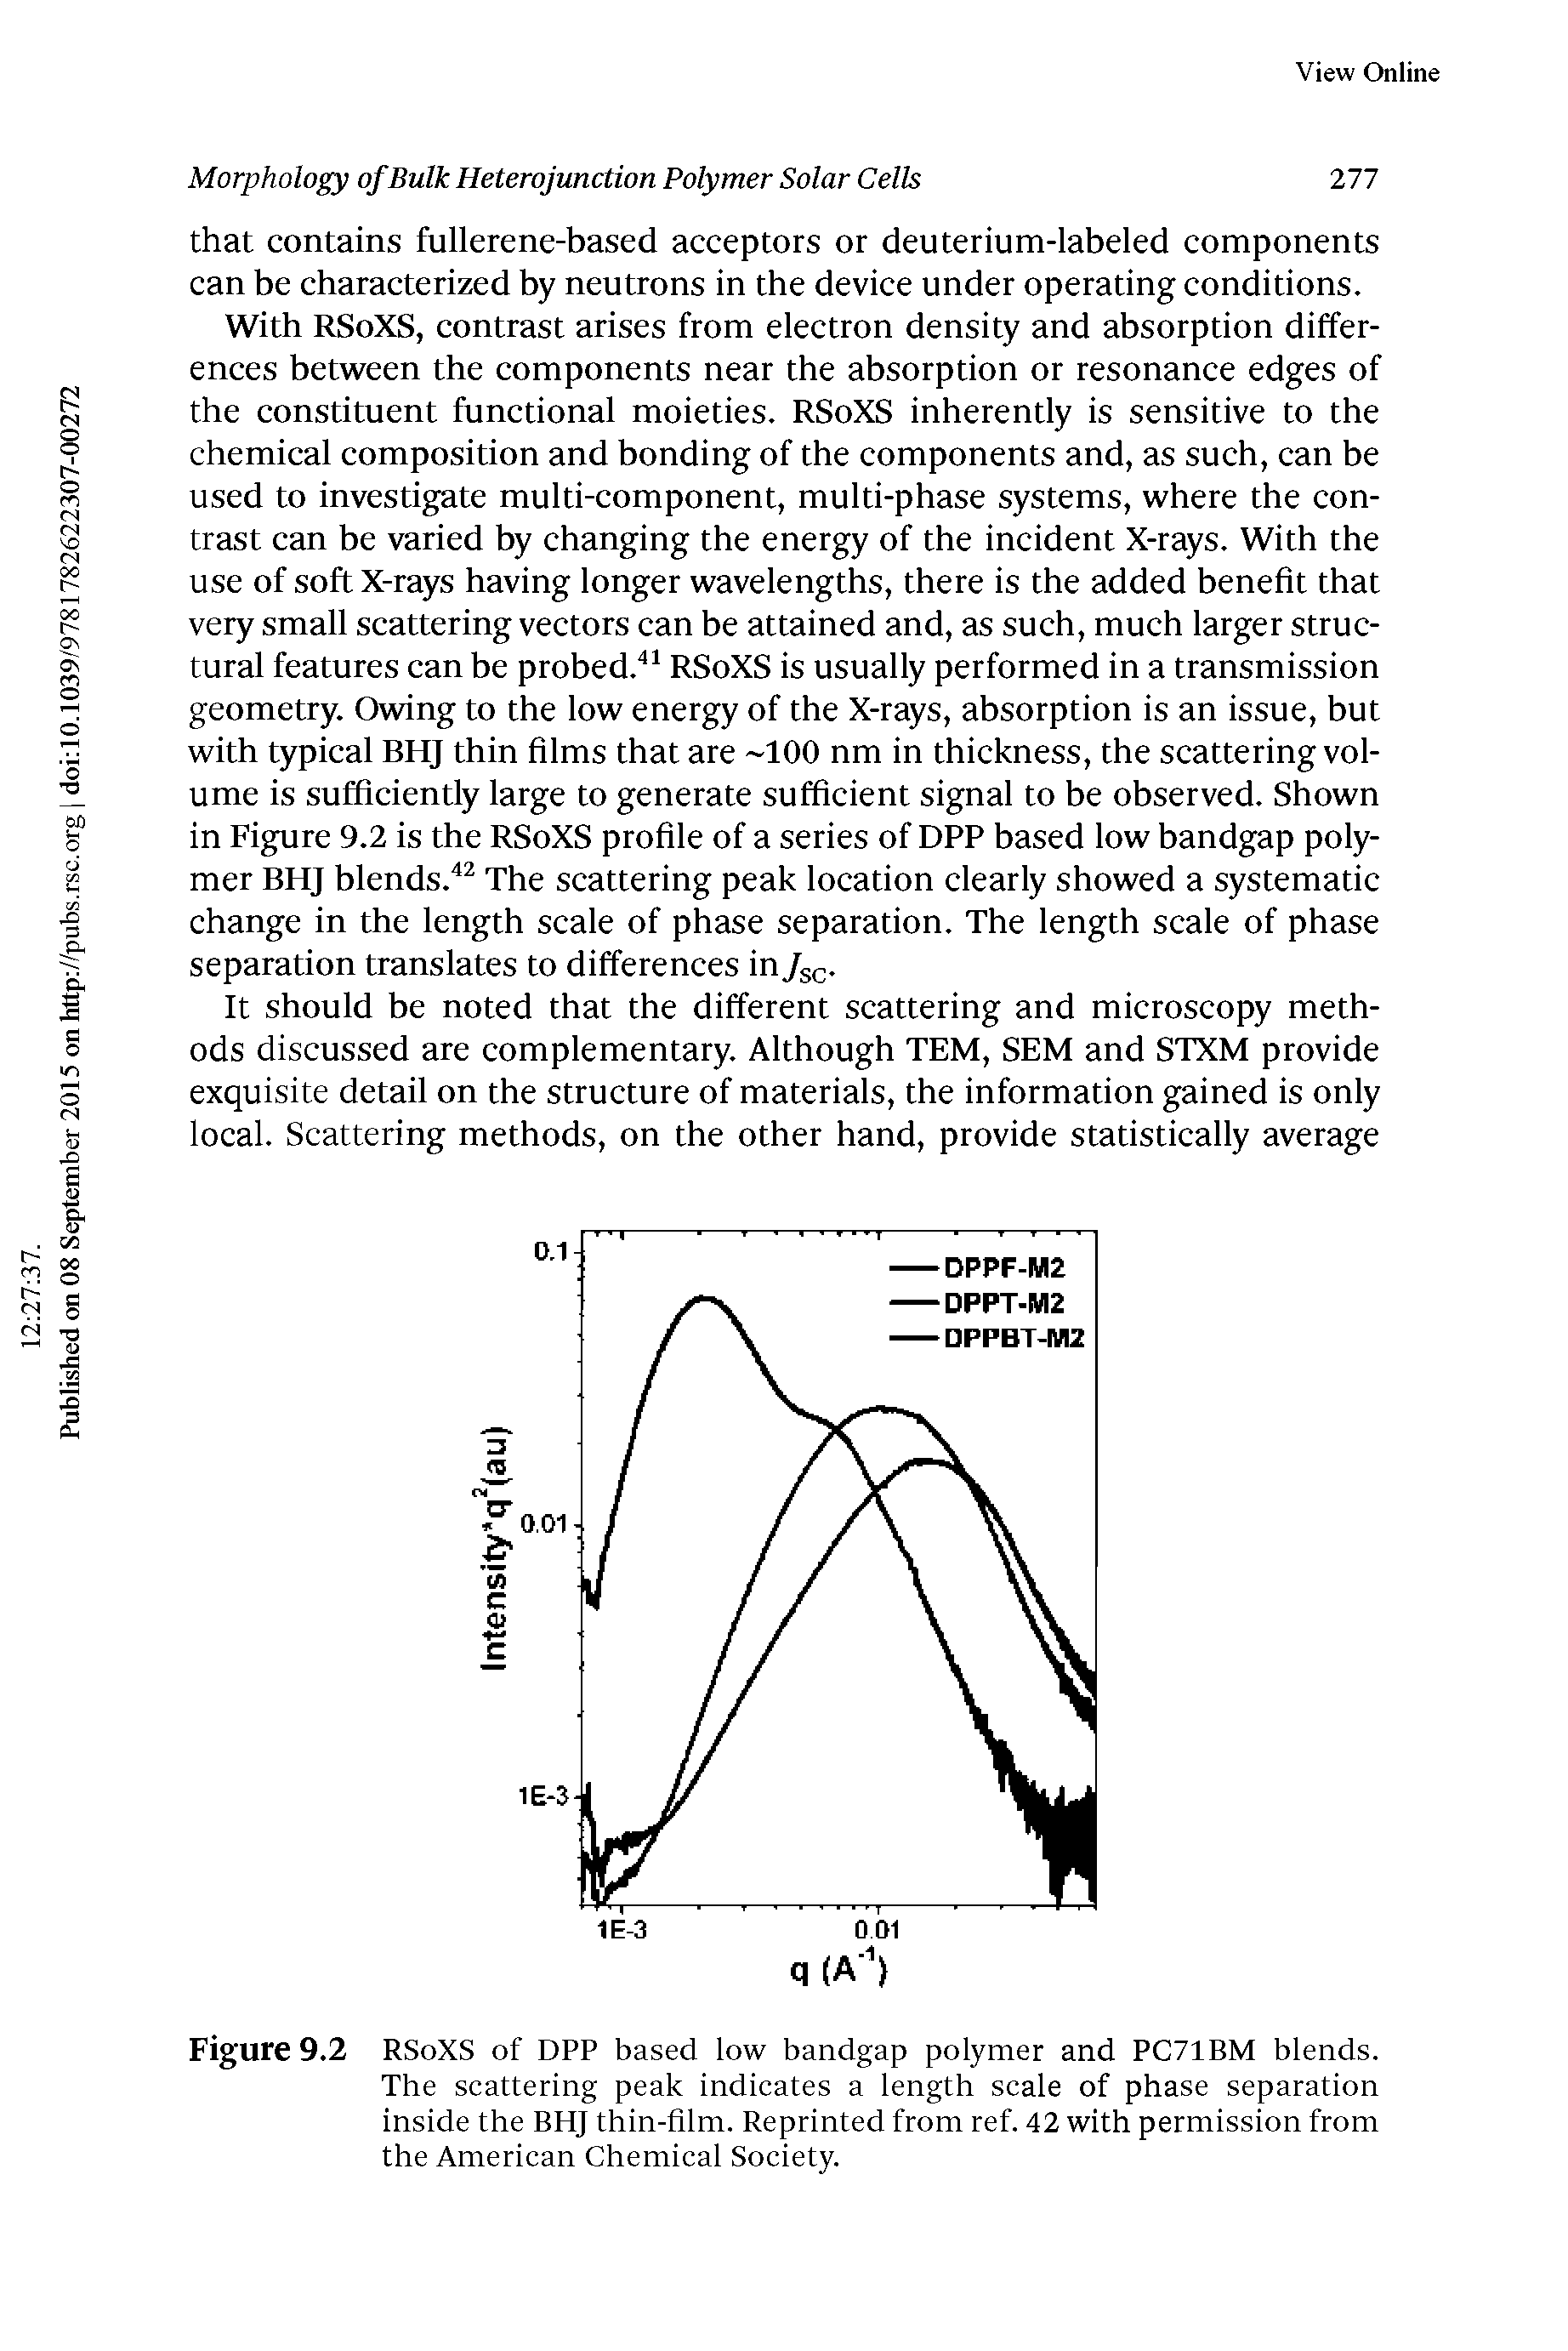 Figure 9.2 RSoXS of DPP based low bandgap polymer and PC71BM blends.